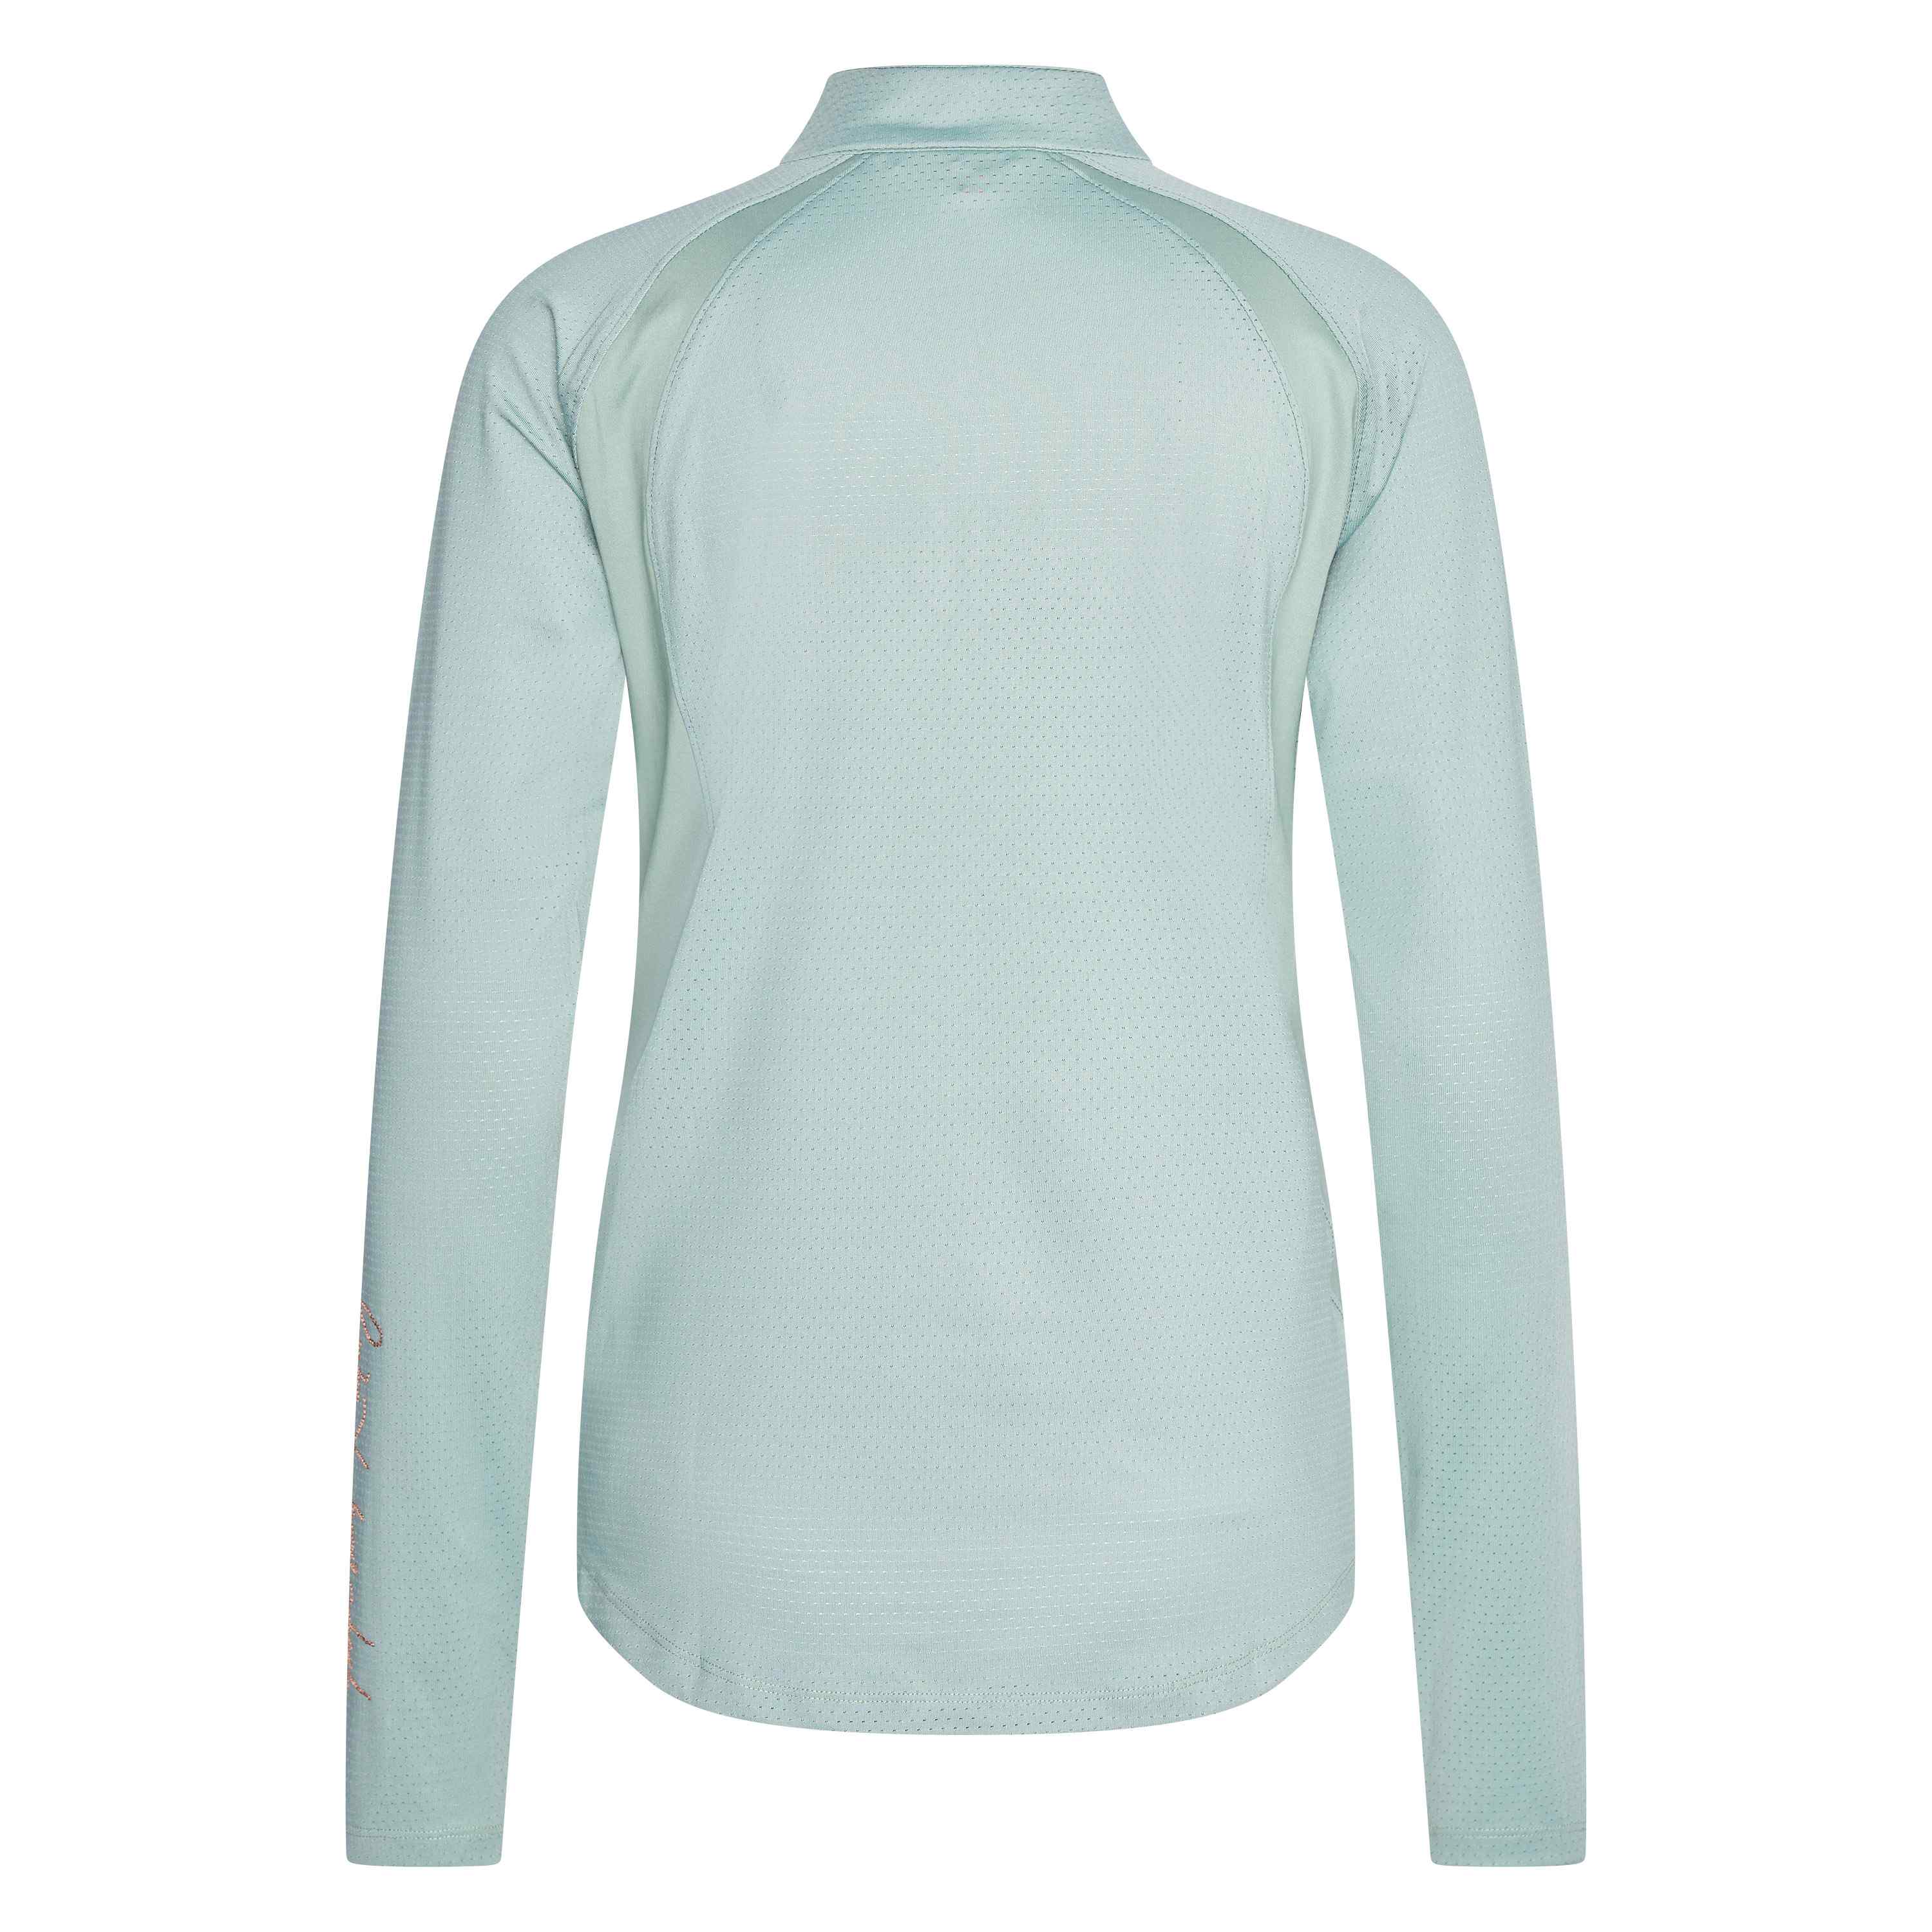 Imperial Riding | Tech Top Longsleeve Speed up Sage Green | M